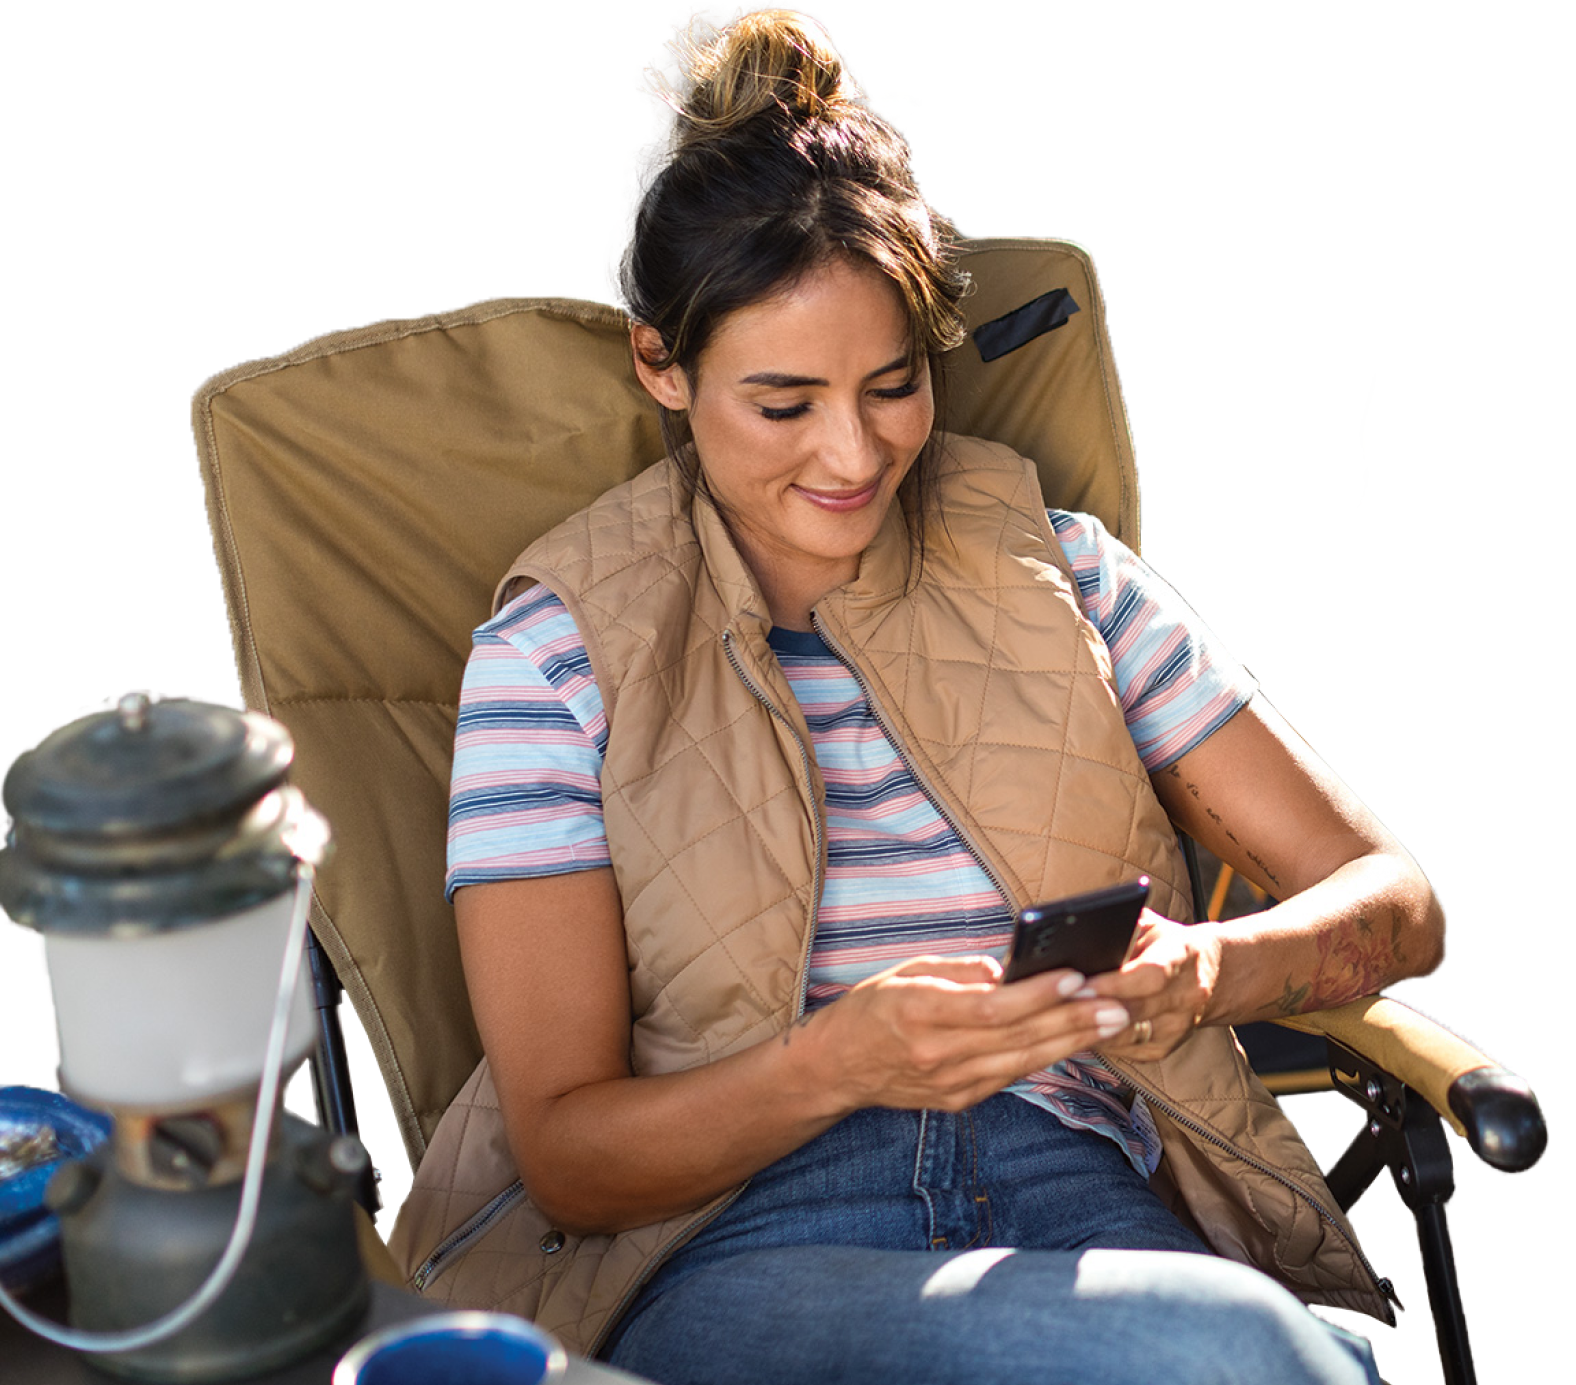 Woman sitting in a camping chair beside table in outdoor setting looking at mobile device